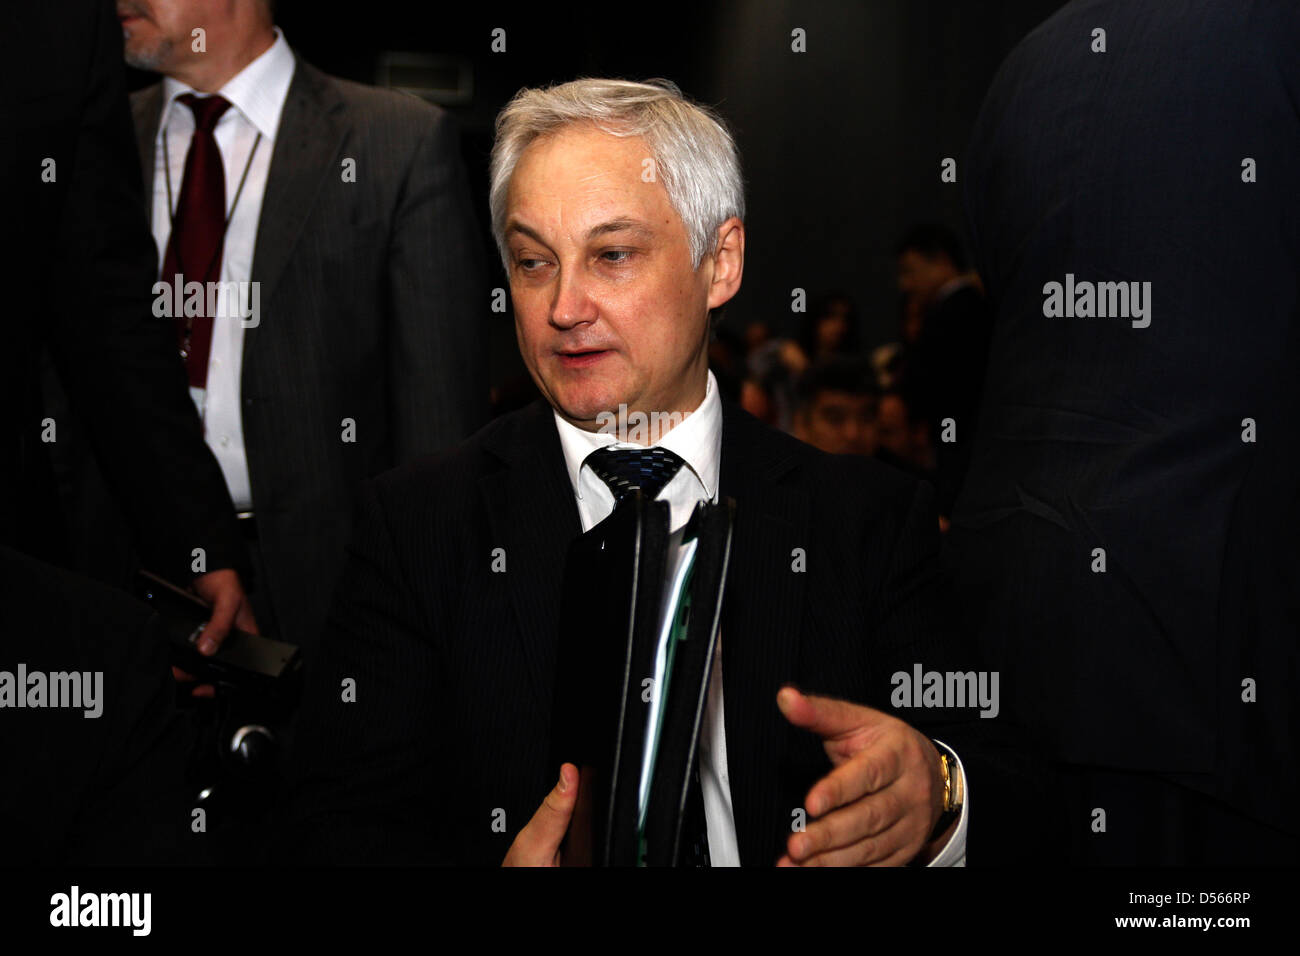 Durban, South Africa. 26th March 2013. Russia's  minister of economic development Andrey Belousov attending the Brics Business forum at the Fufth Brics Summit in Durban. Brics is the group of developing nations, comprising Brazil, Russia, India, China, and South Africa. Picture: Giordano Stolley/Alamy Live News Stock Photo